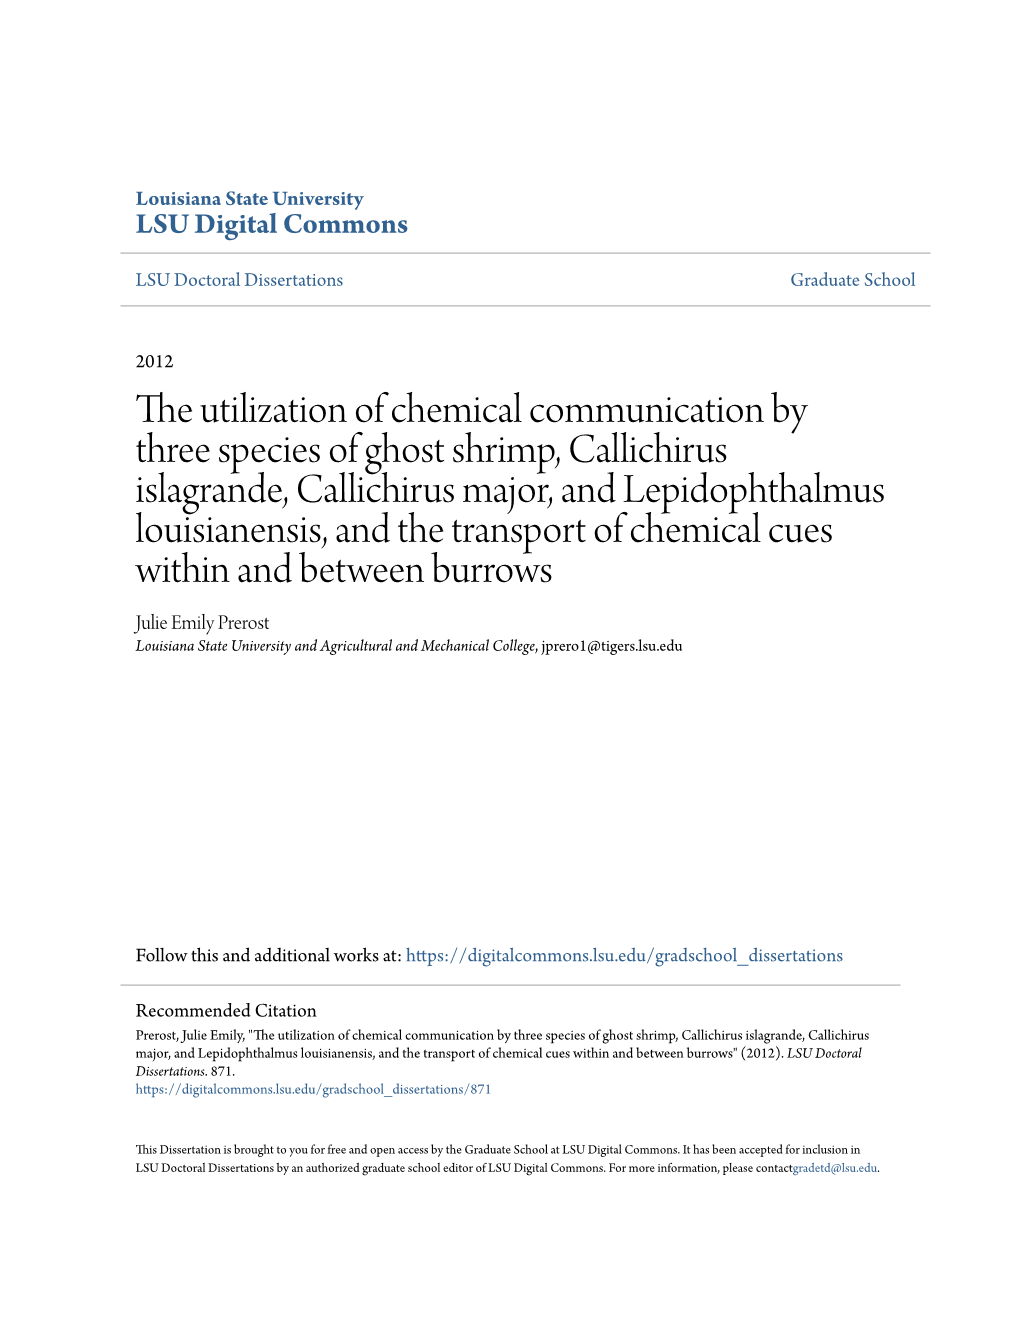 The Utilization of Chemical Communication by Three Species Of